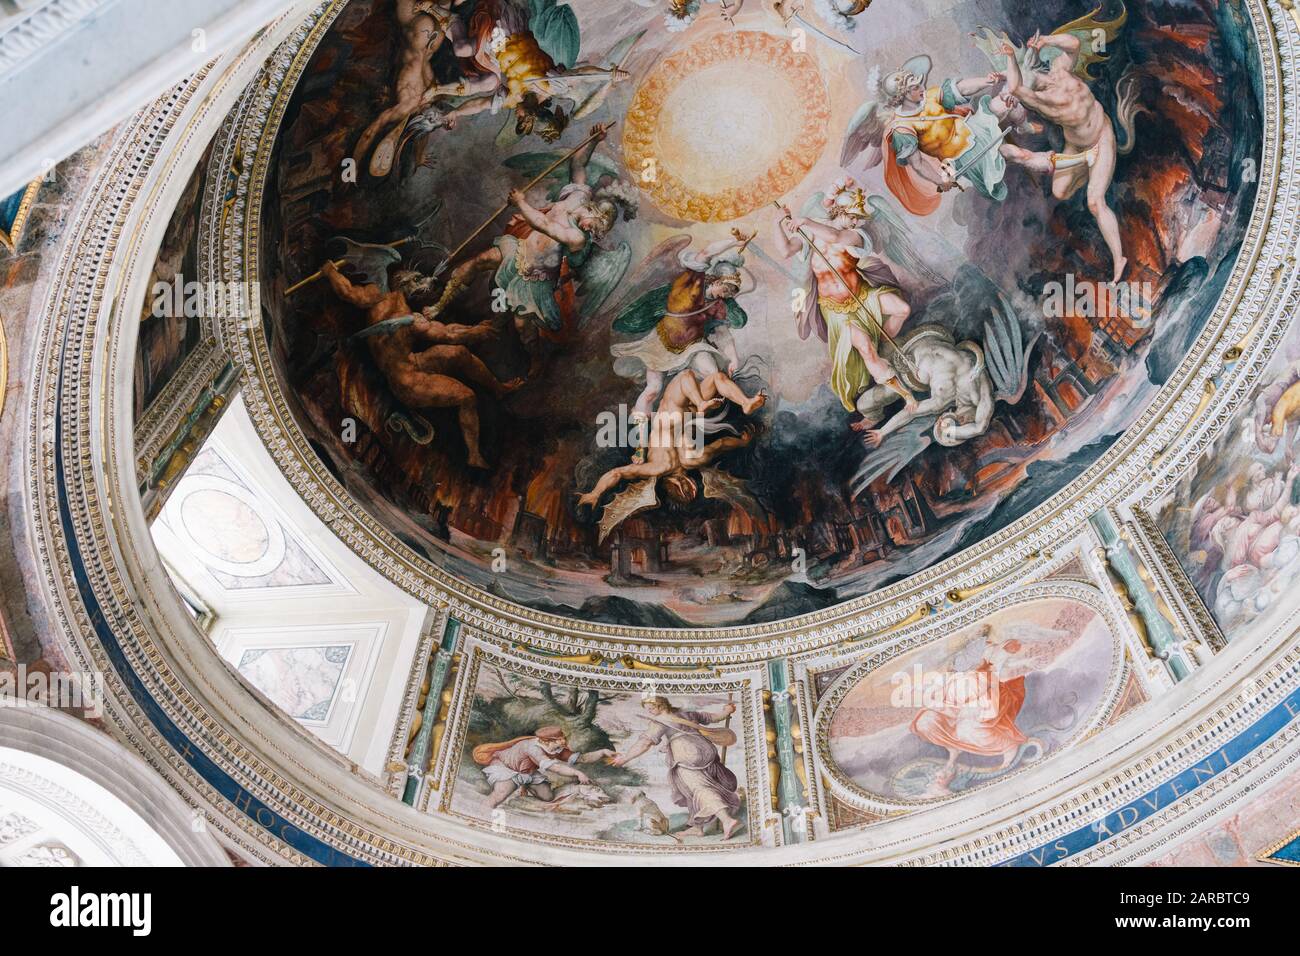 Rome, Italy - Jan 3, 2020: Beautiful ceiling art at the Vatican museum in Rome. Stock Photo